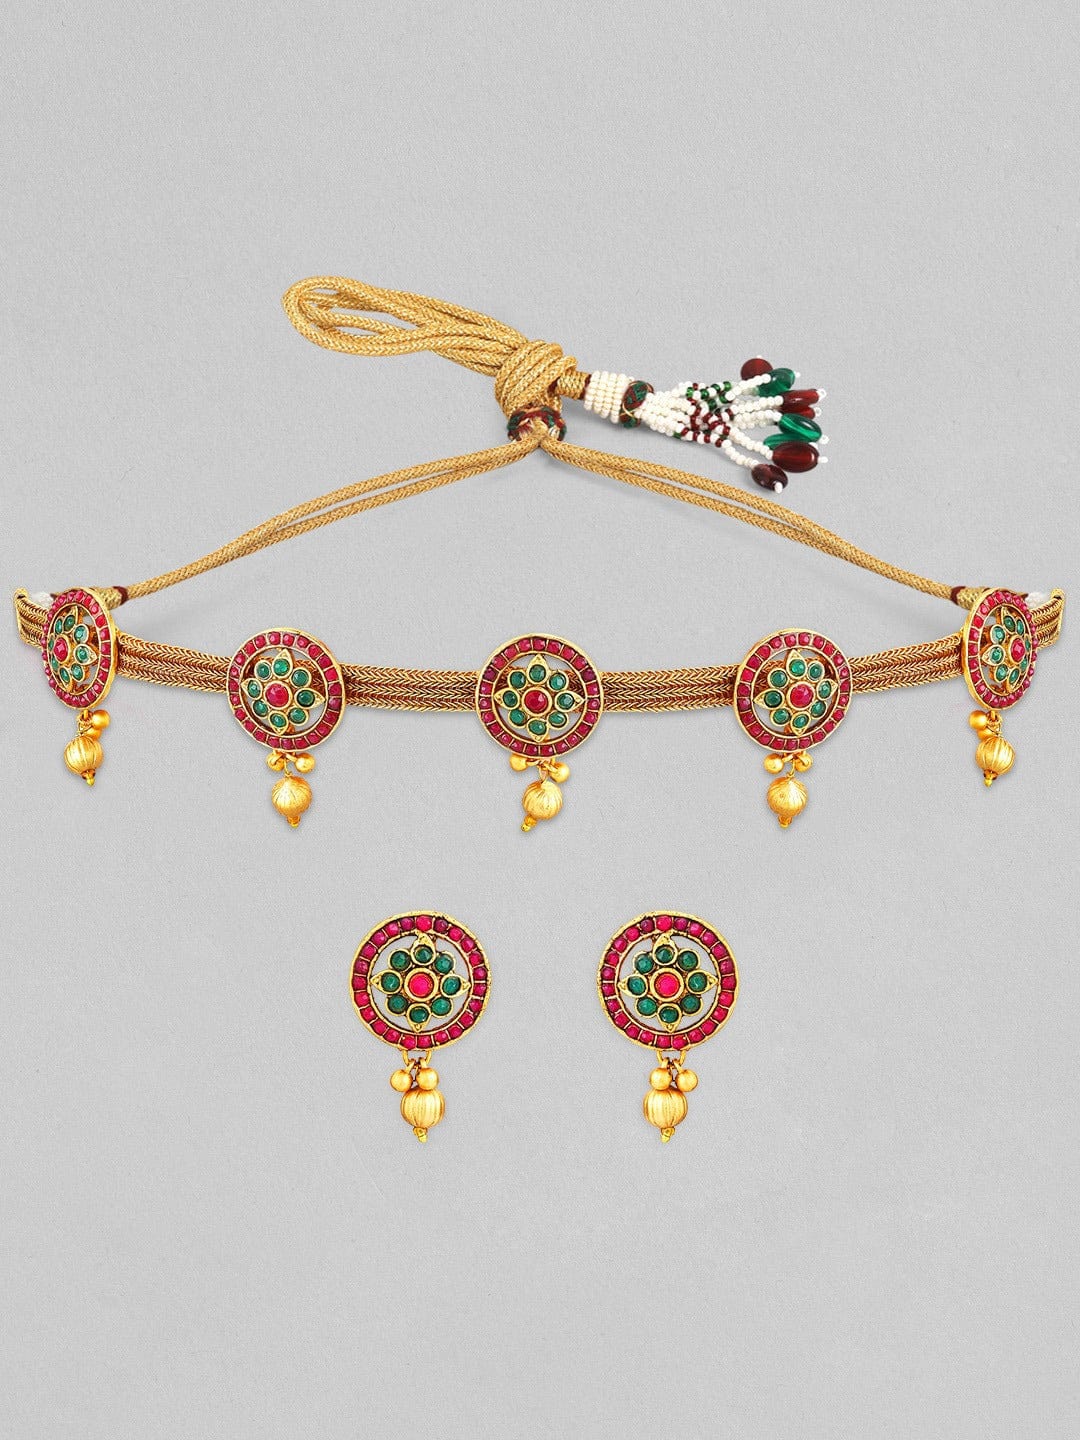 Rubans Gold Plated Choker Necklace Set With Red And Green Stones And Golden Beads. Necklace Set